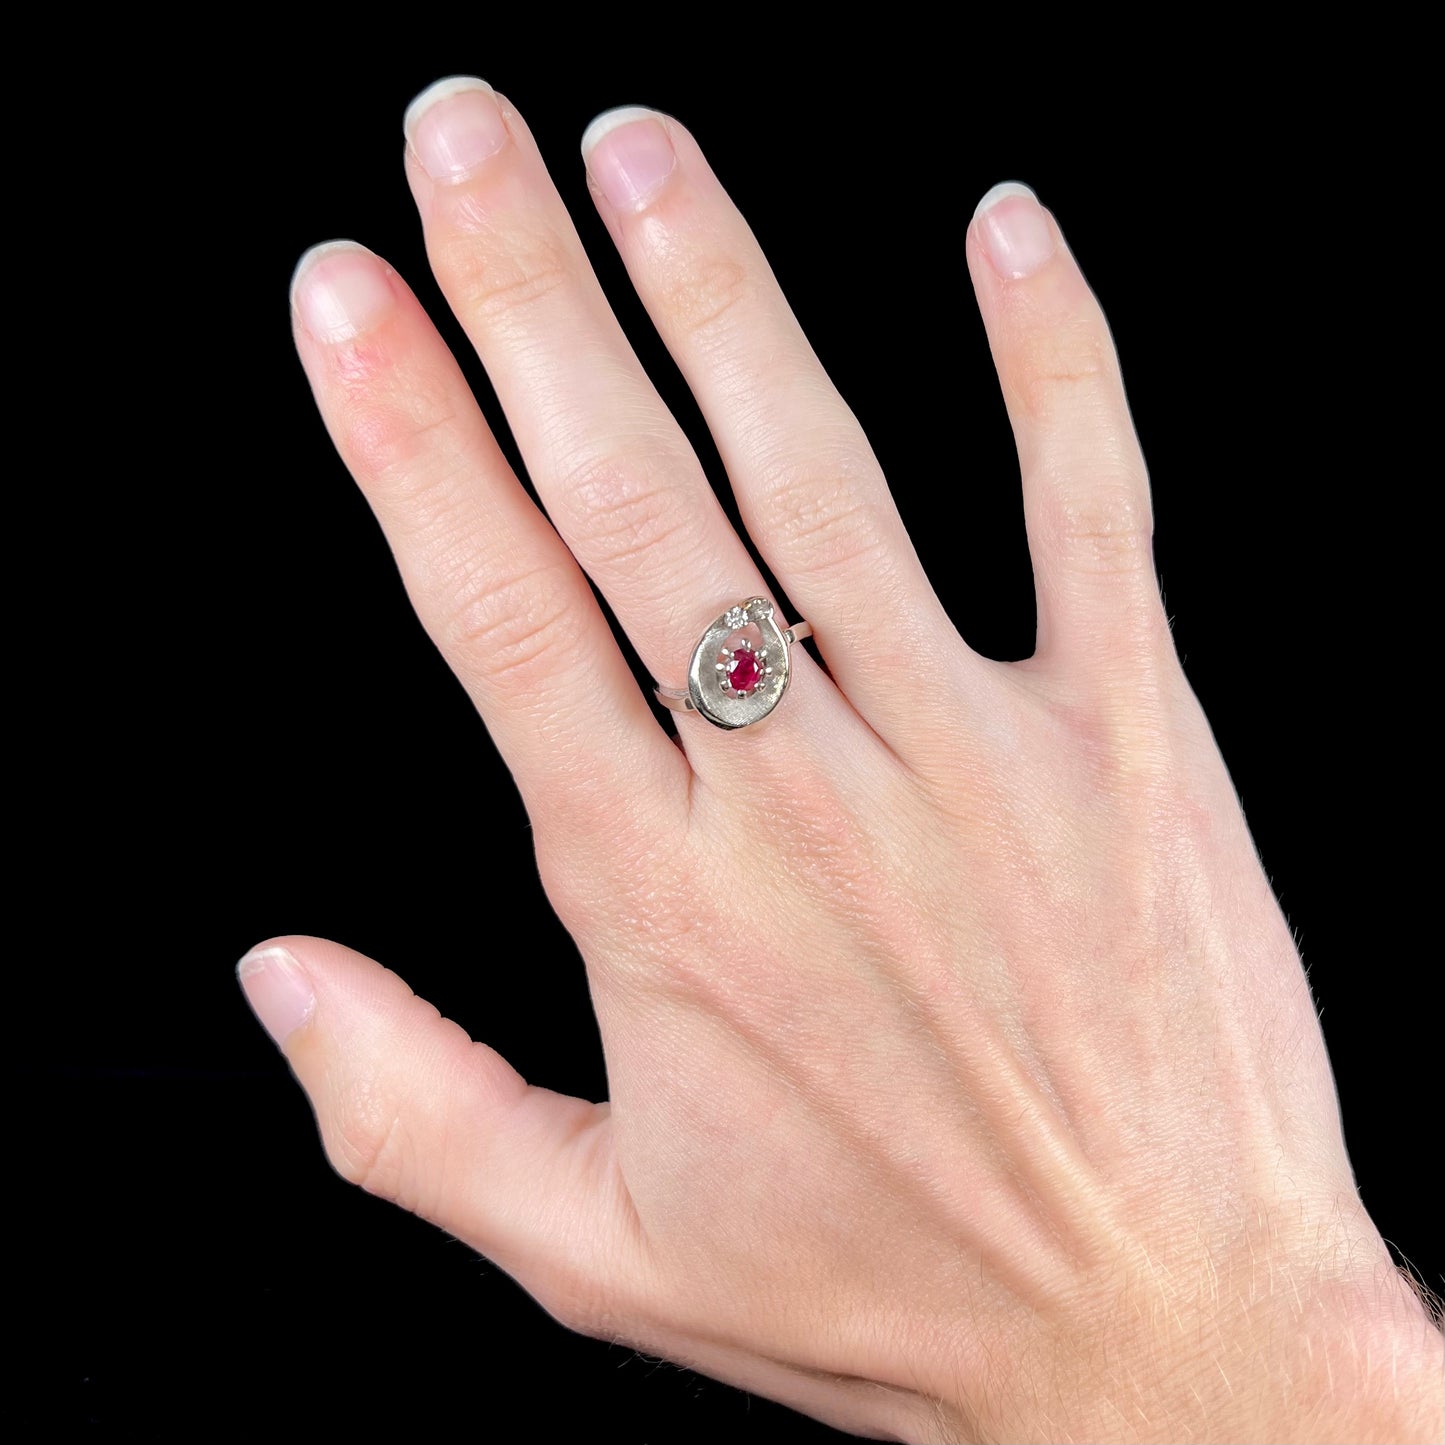 A ladies' estate white gold ruby ring set with a diamond accent stone.